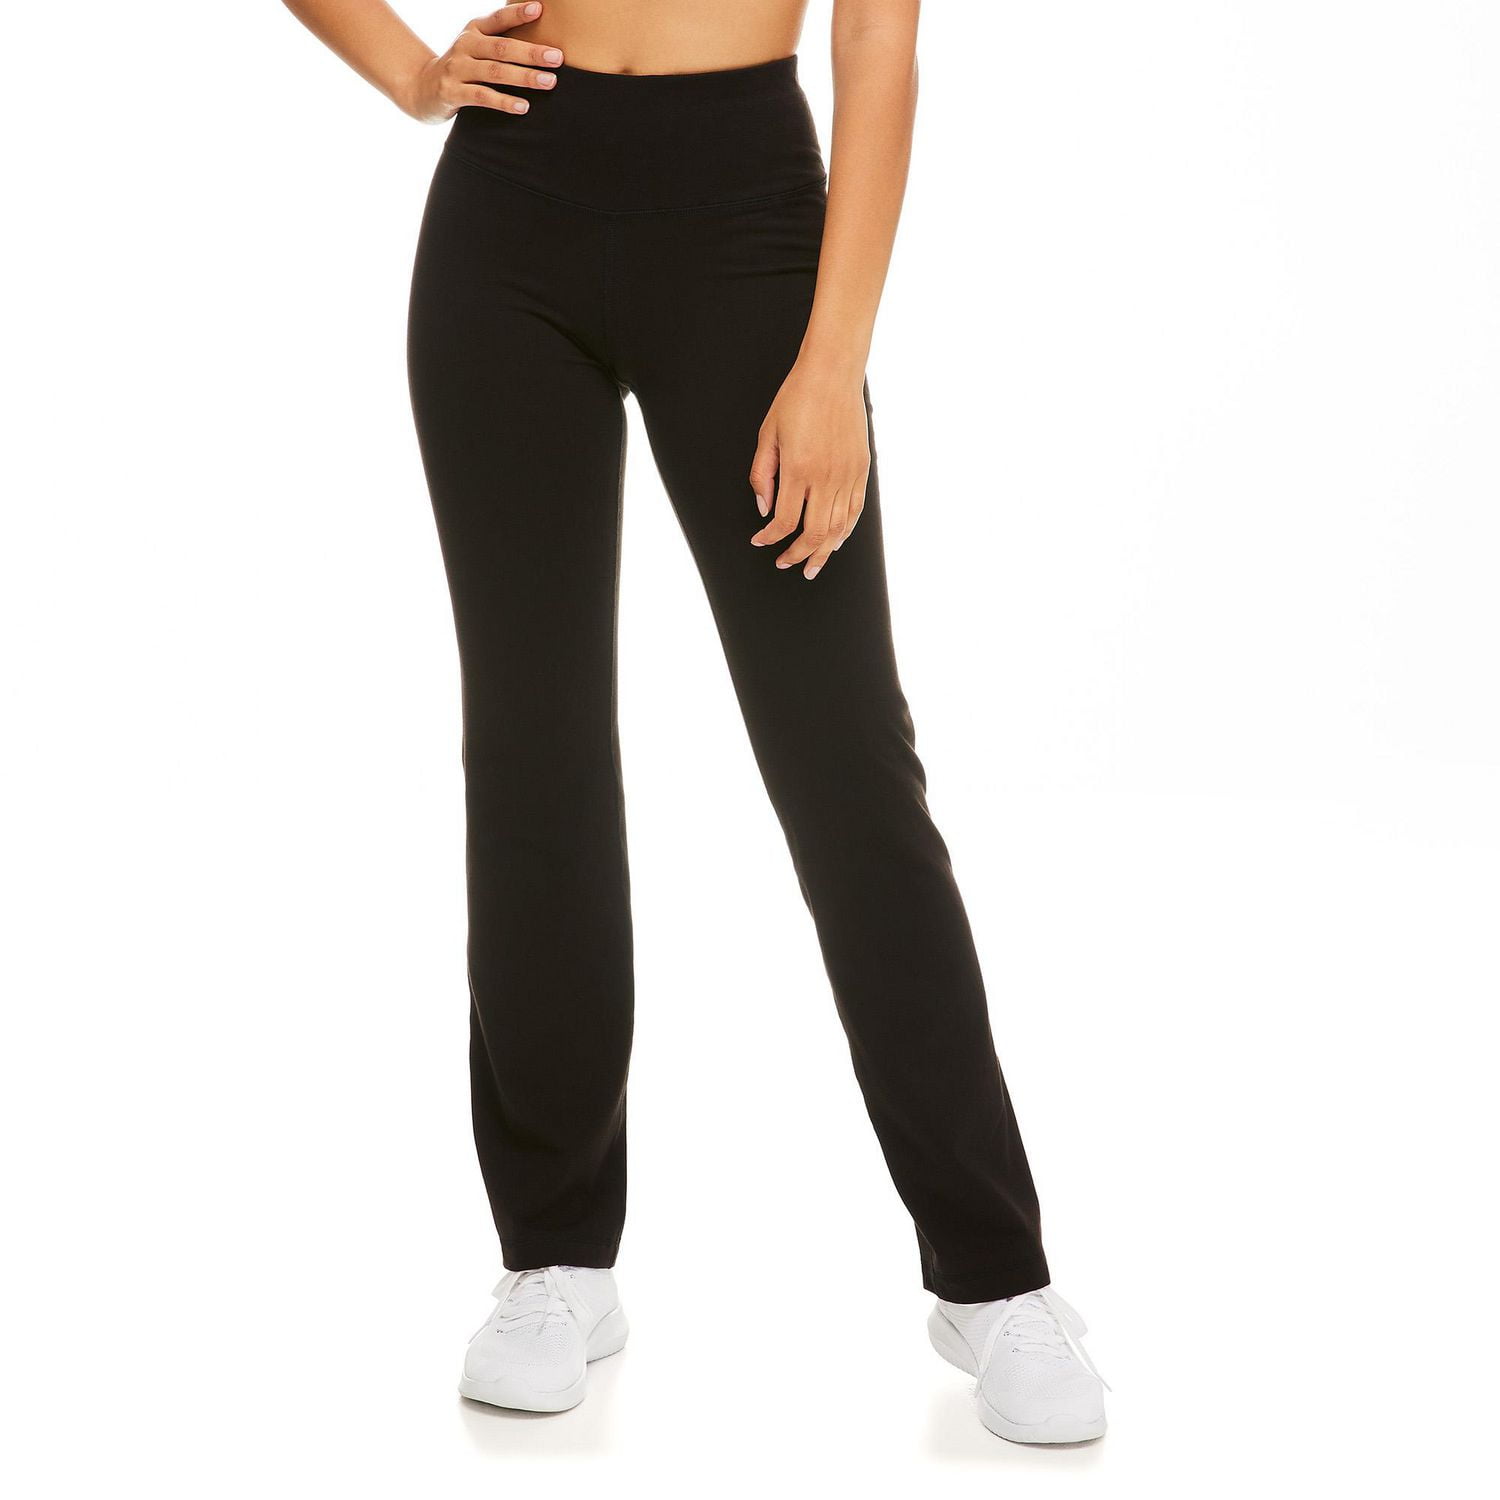 ATHLETIC WORKS LEGGING/ PANT/CAPRIS/JOGGER - AAA Polymer